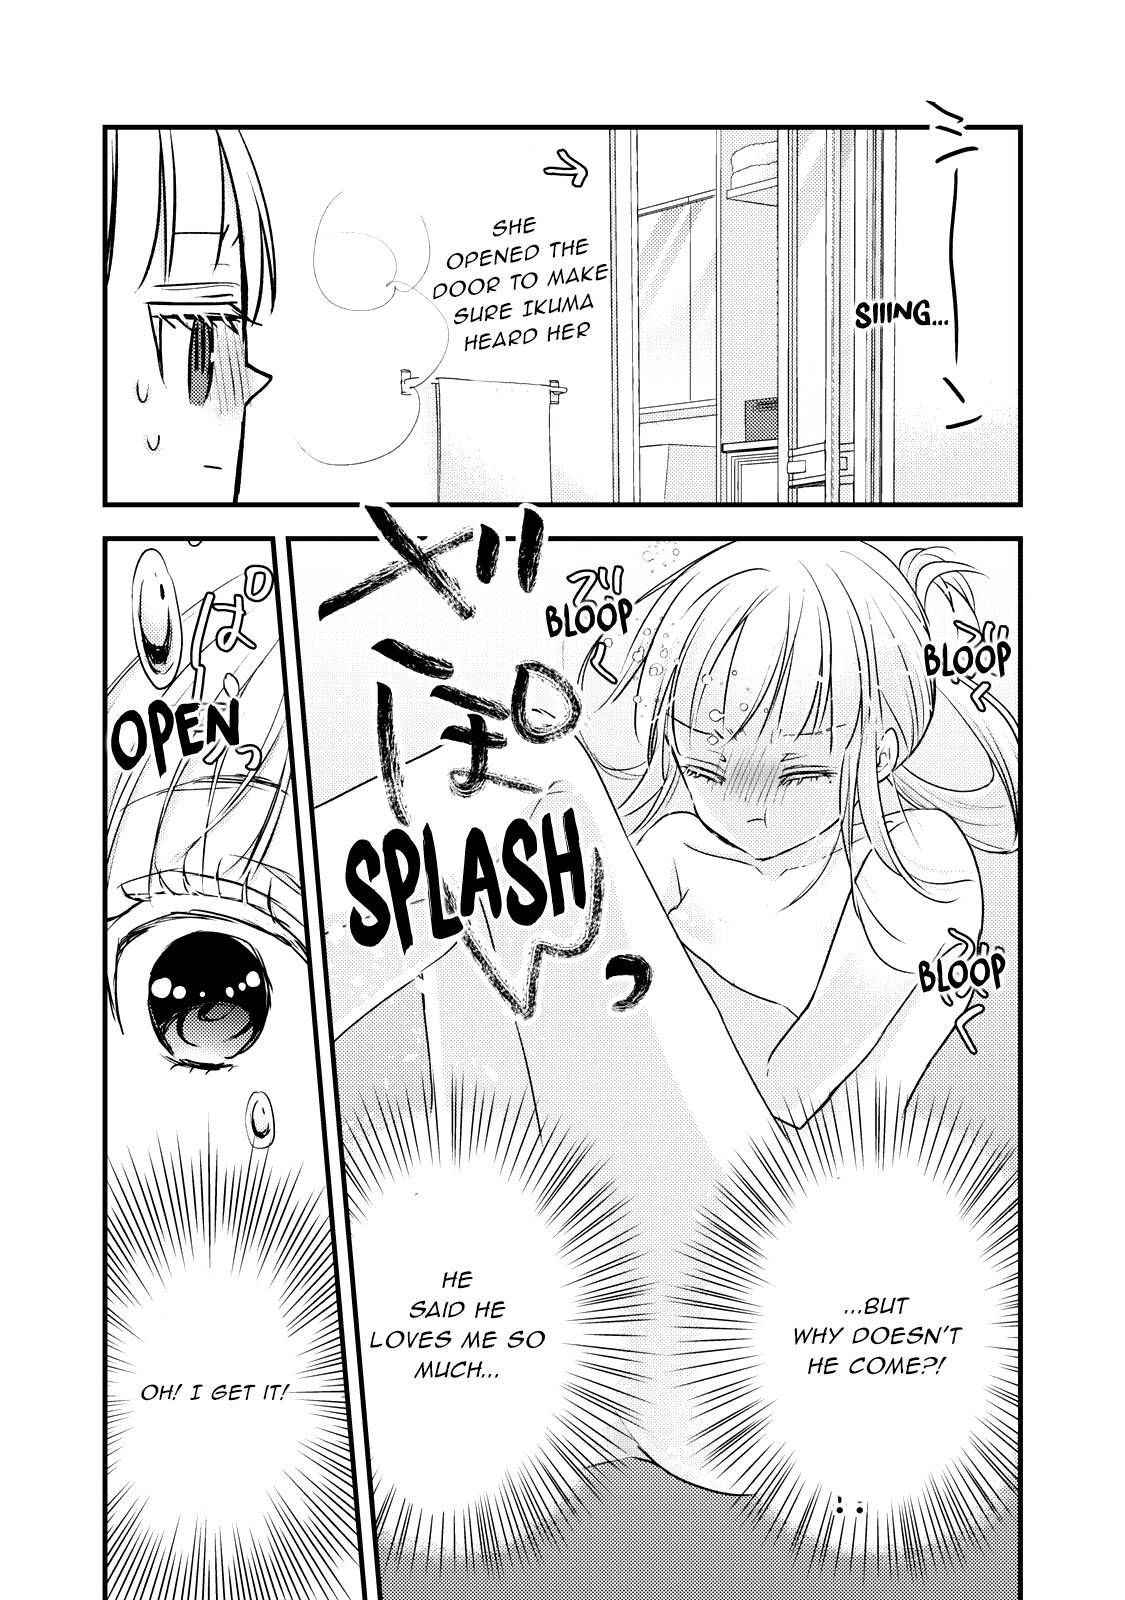 We May Be an Inexperienced Couple but... chapter 88 page 6